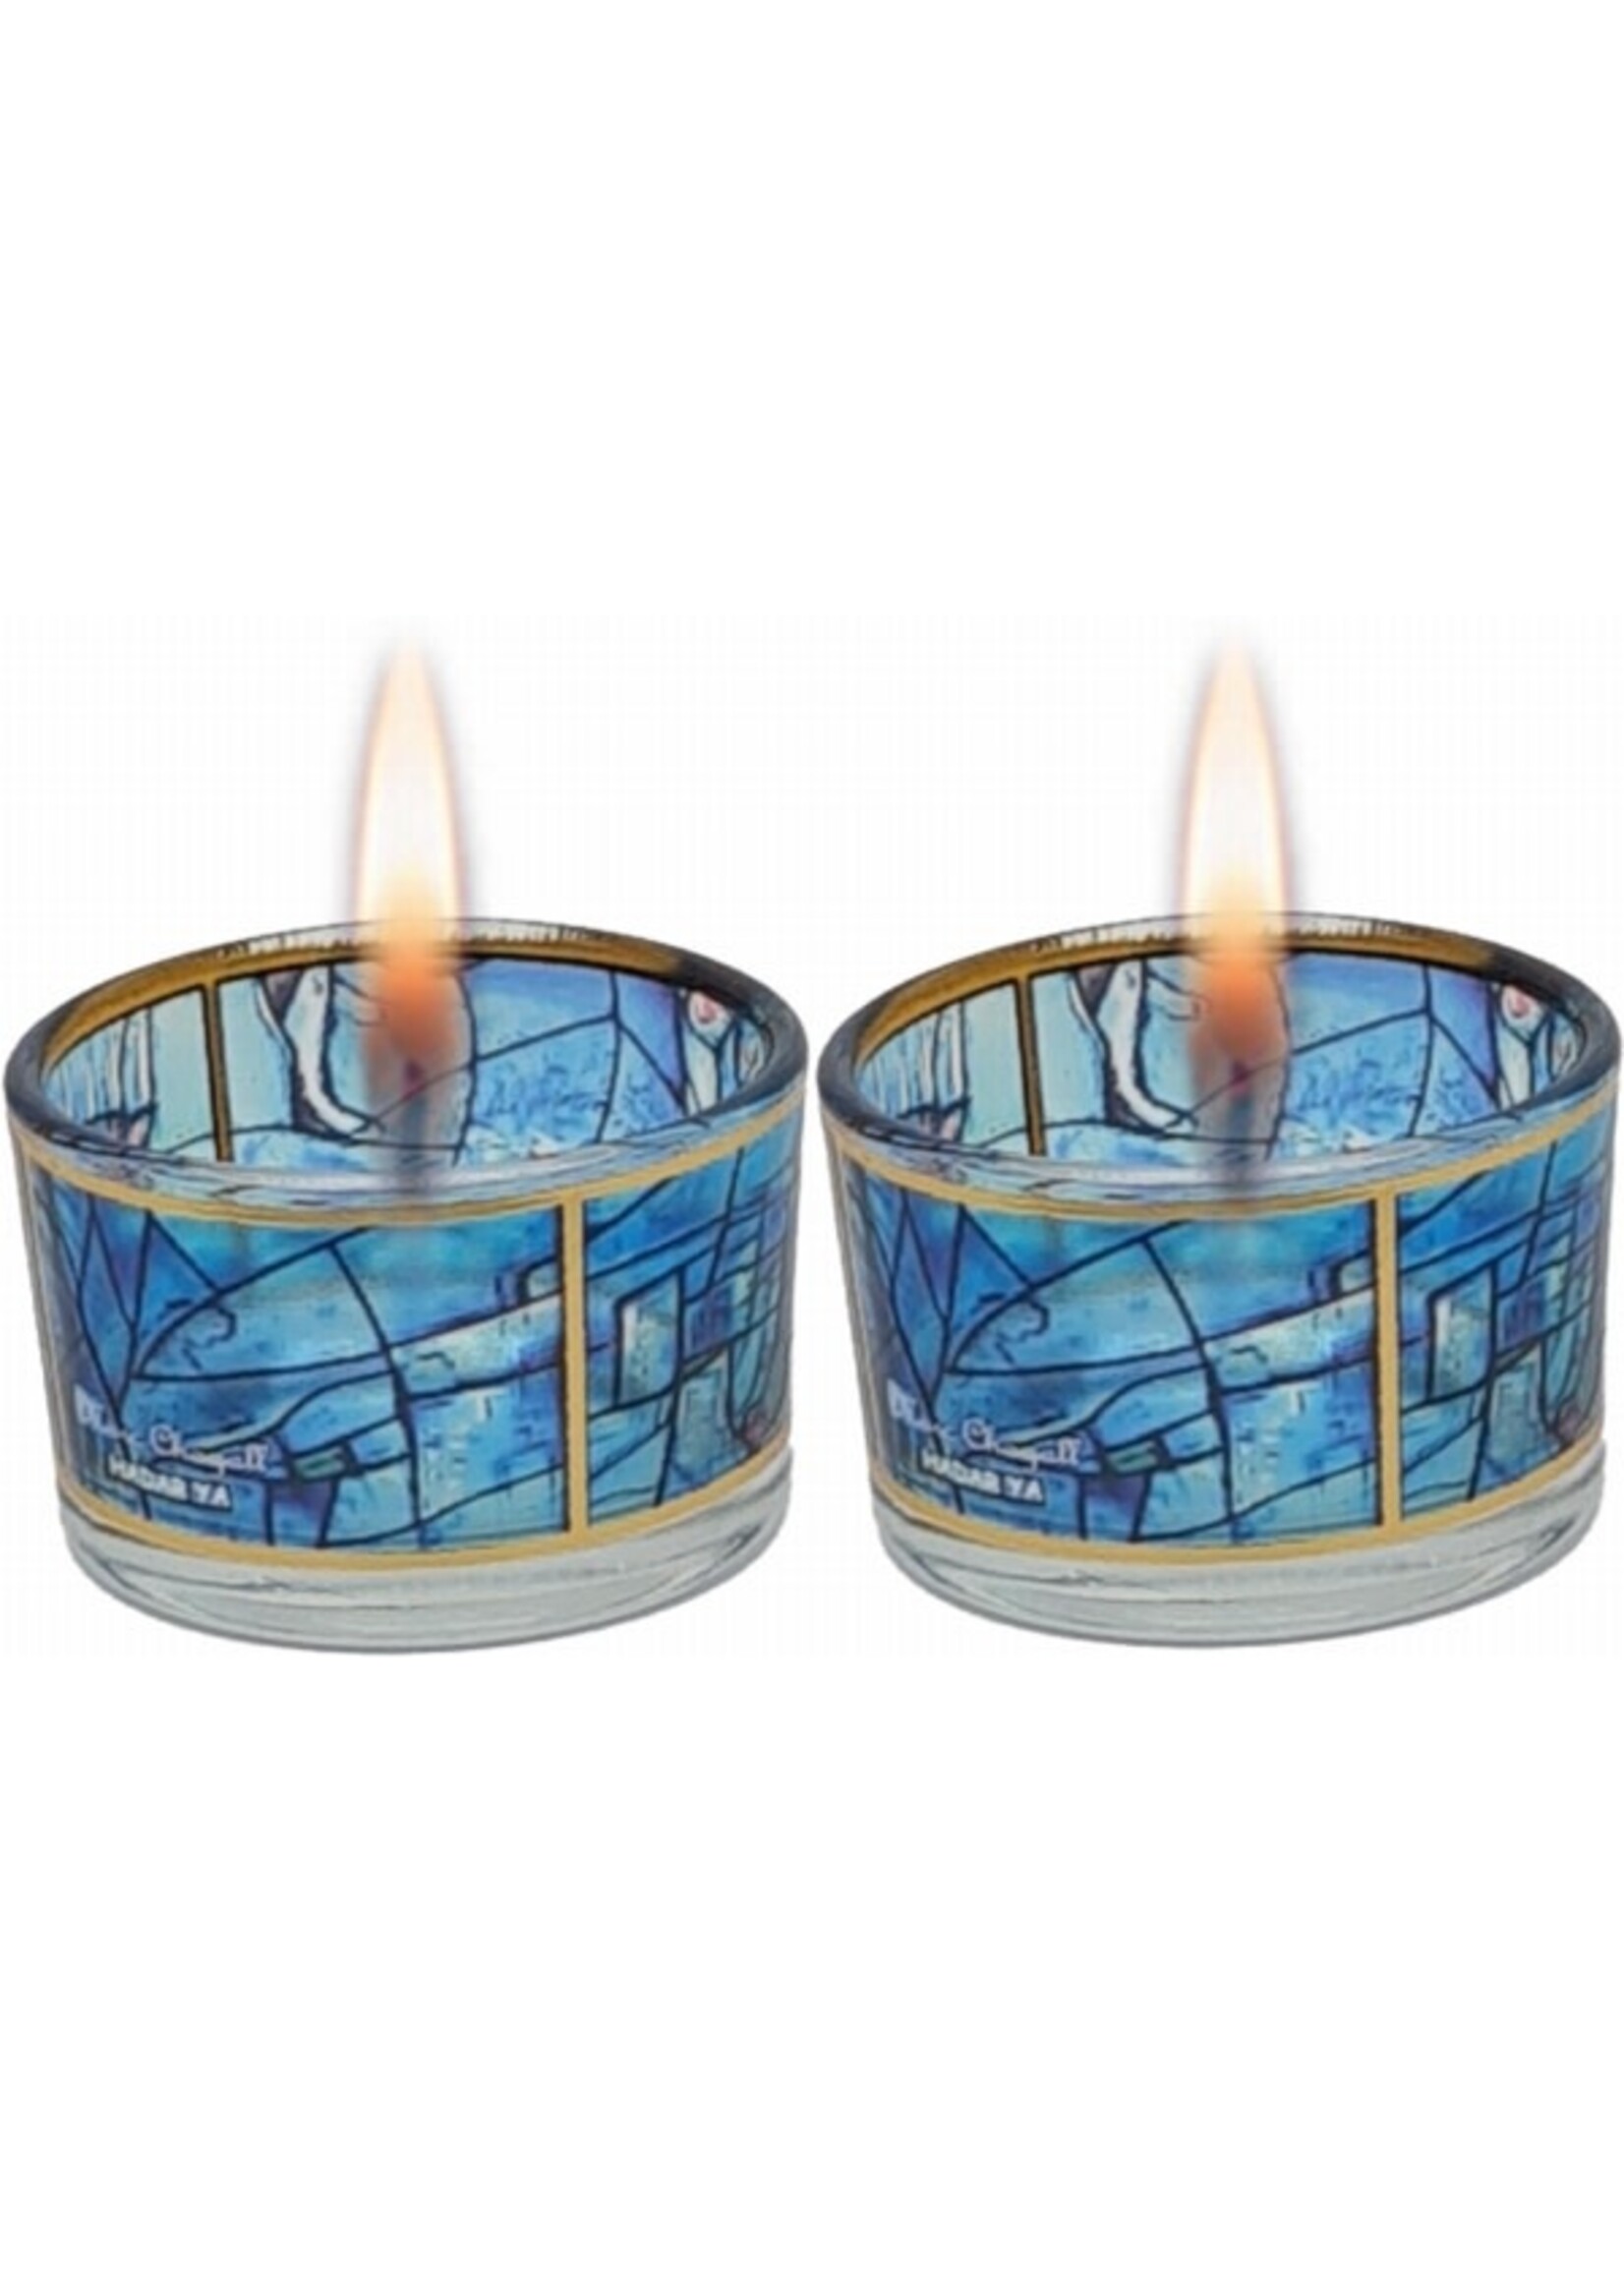 TEALIGHT CANDLE HOLDER CHAGALL BLUES